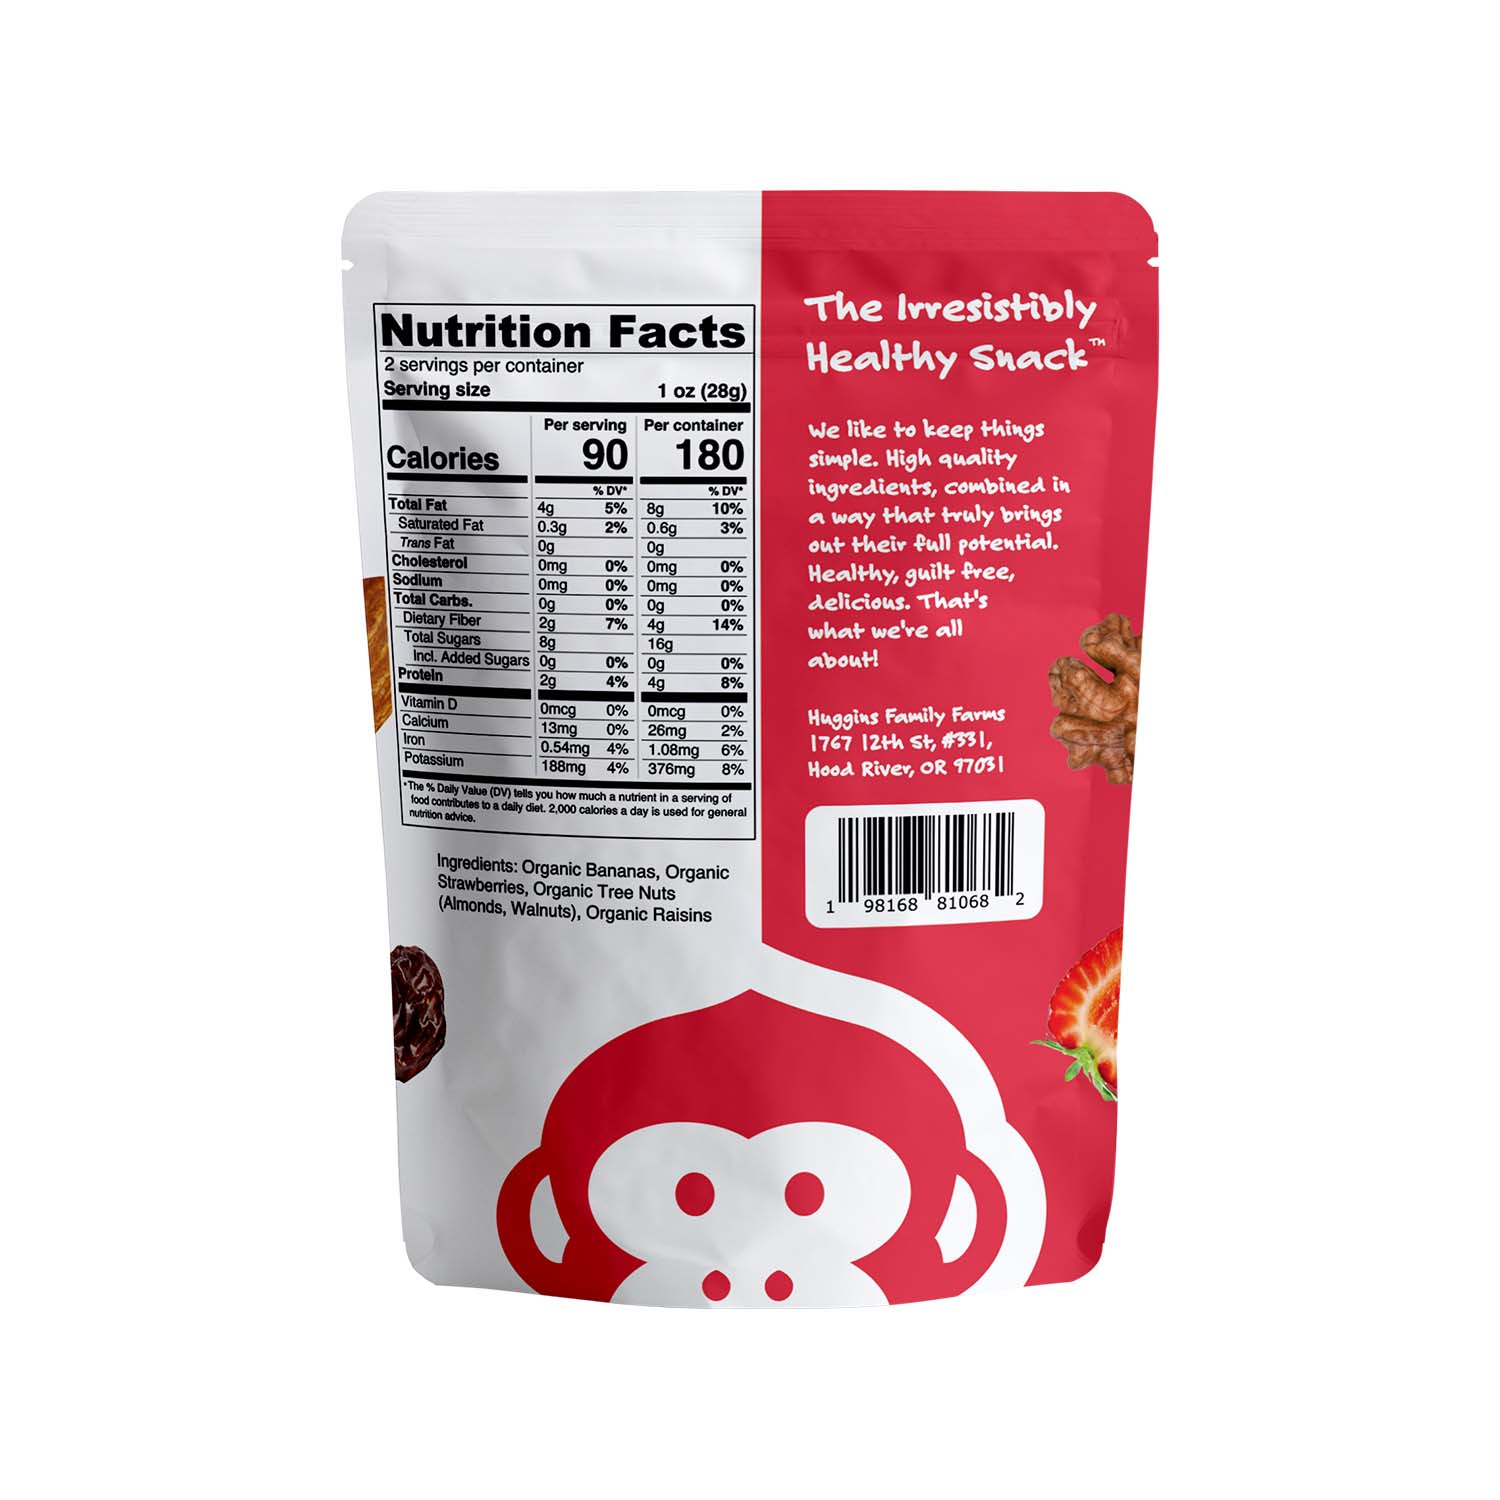 The back side of a single pack of strawberry flavored monkey brittle on a white background. The package says the irresistibly healthy snack on the top, and has a cartoon monkey face at the bottom